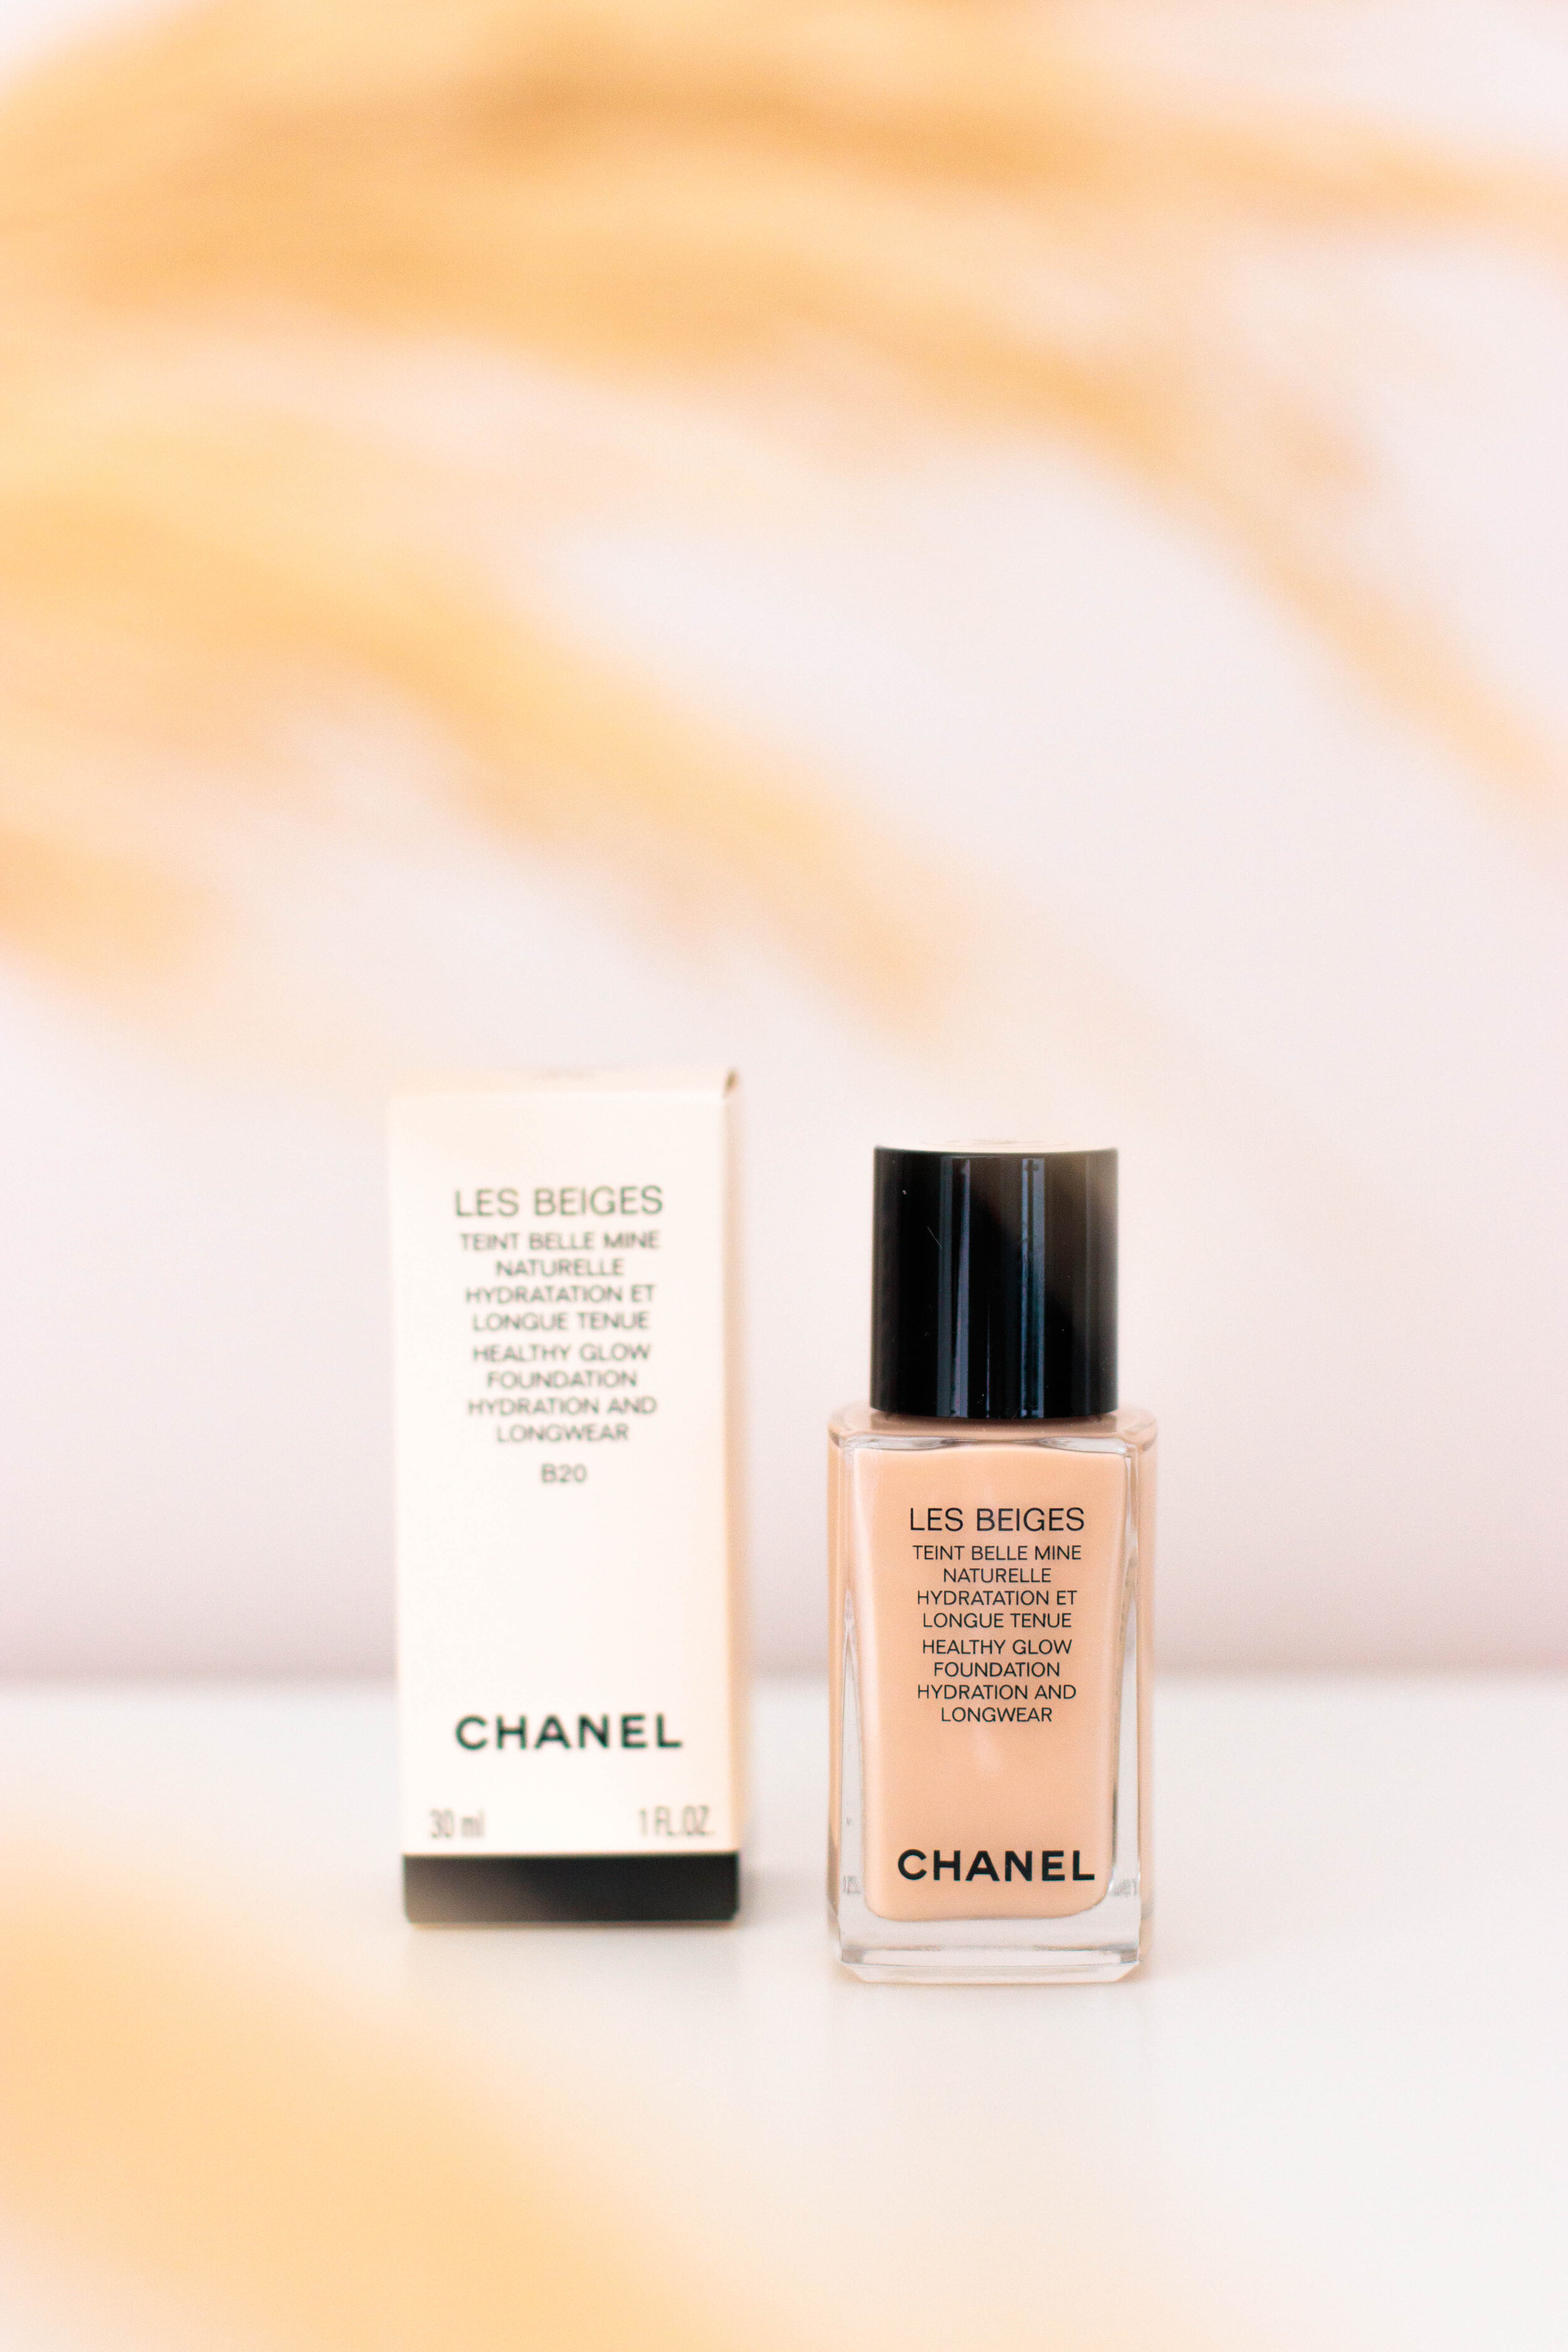 Chanel Les Beiges Healthy Glow Foundation vs. Water-Fresh